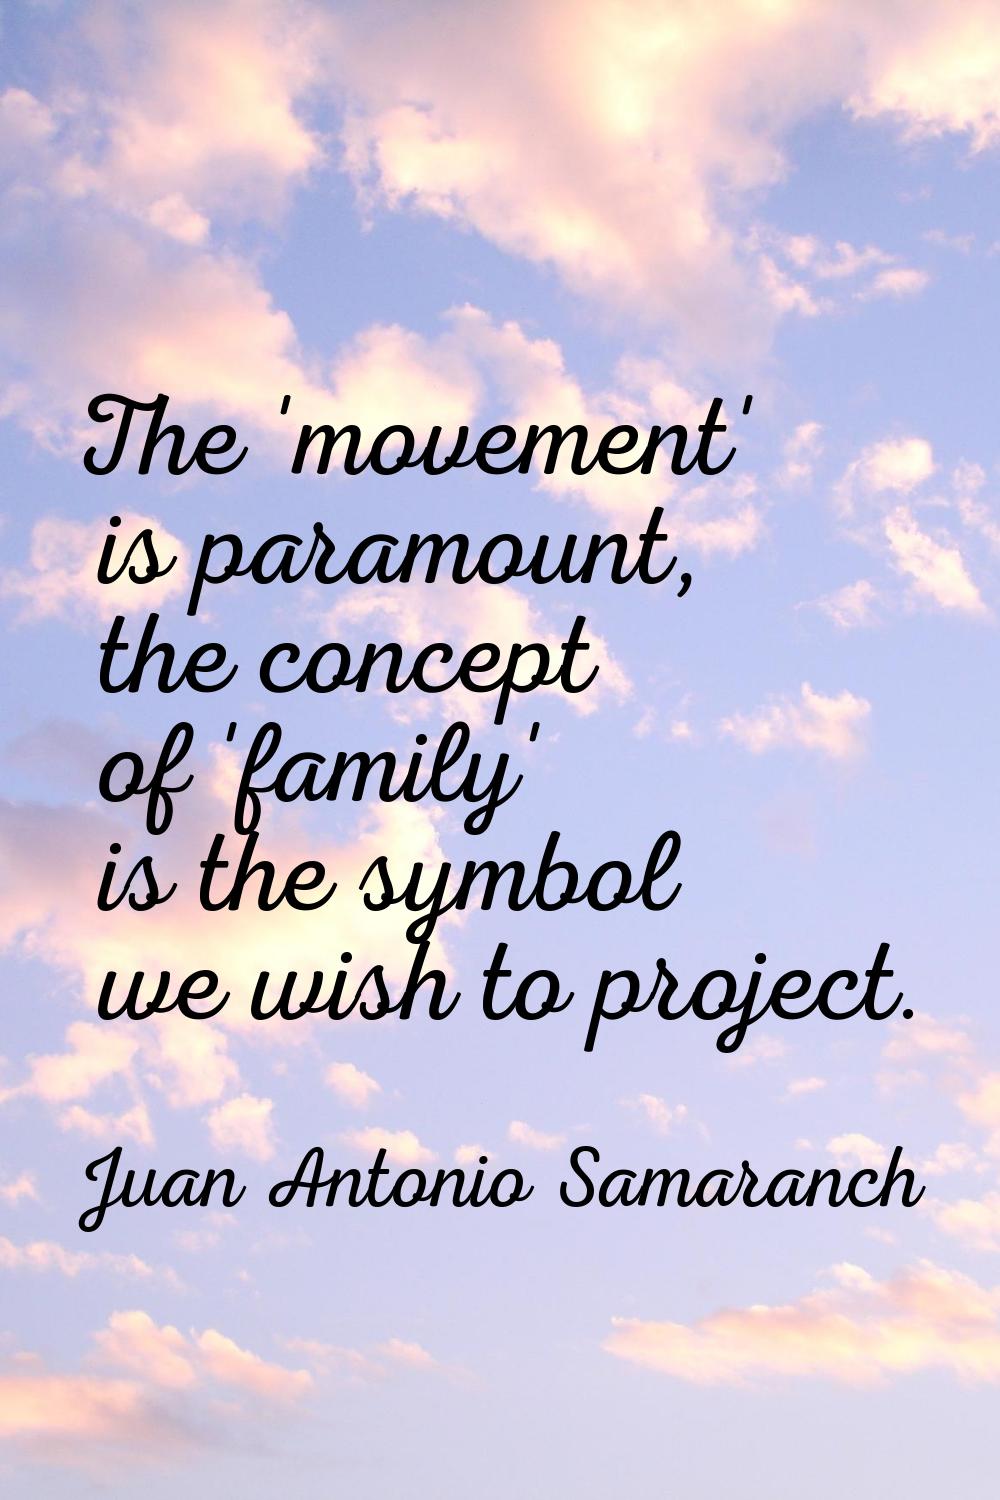 The 'movement' is paramount, the concept of 'family' is the symbol we wish to project.